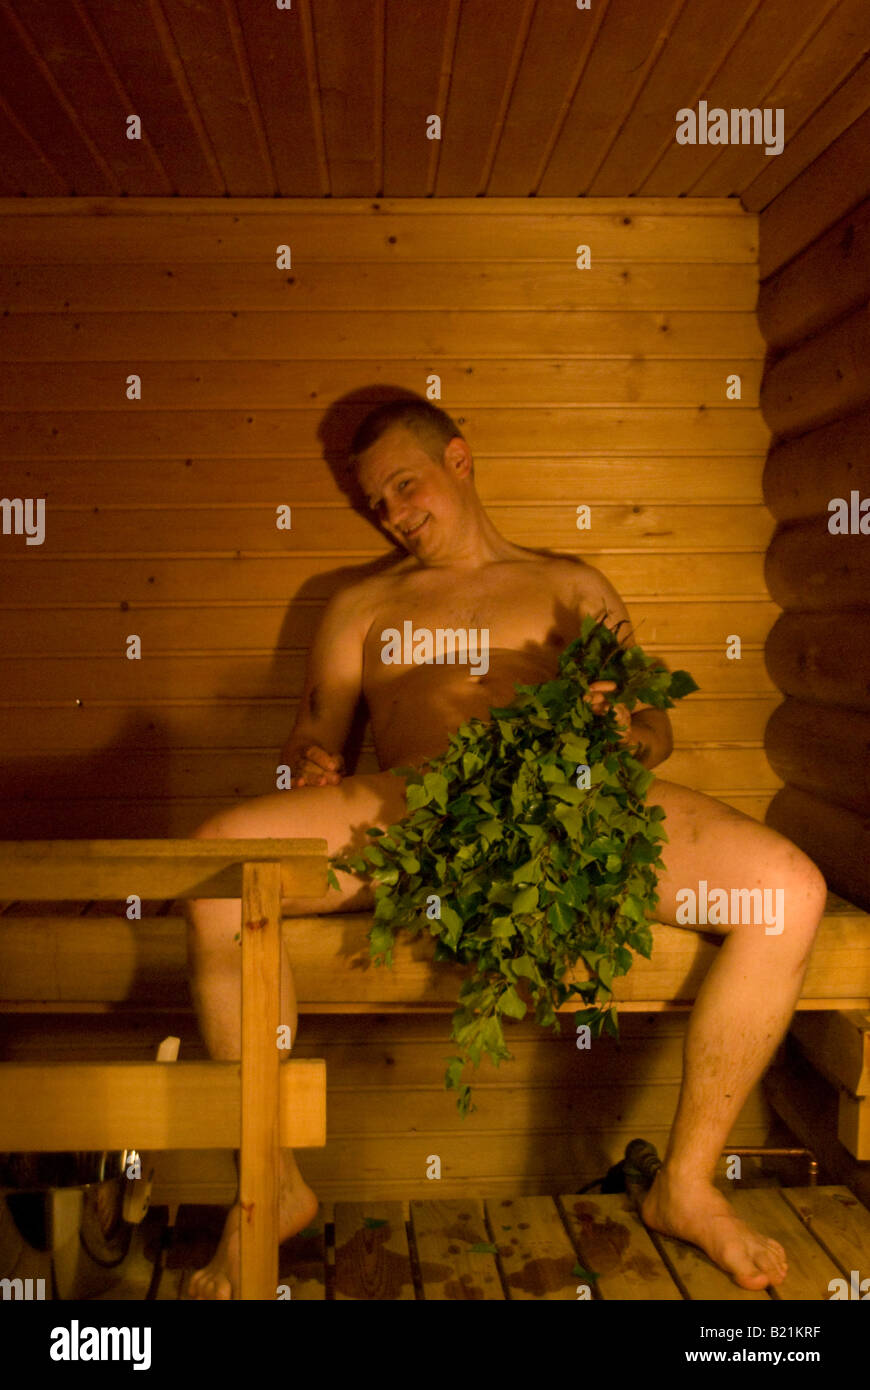 A crazy naked finn in Sauna, covering private parts with a traditional finnish sauna whisk Stock Photo